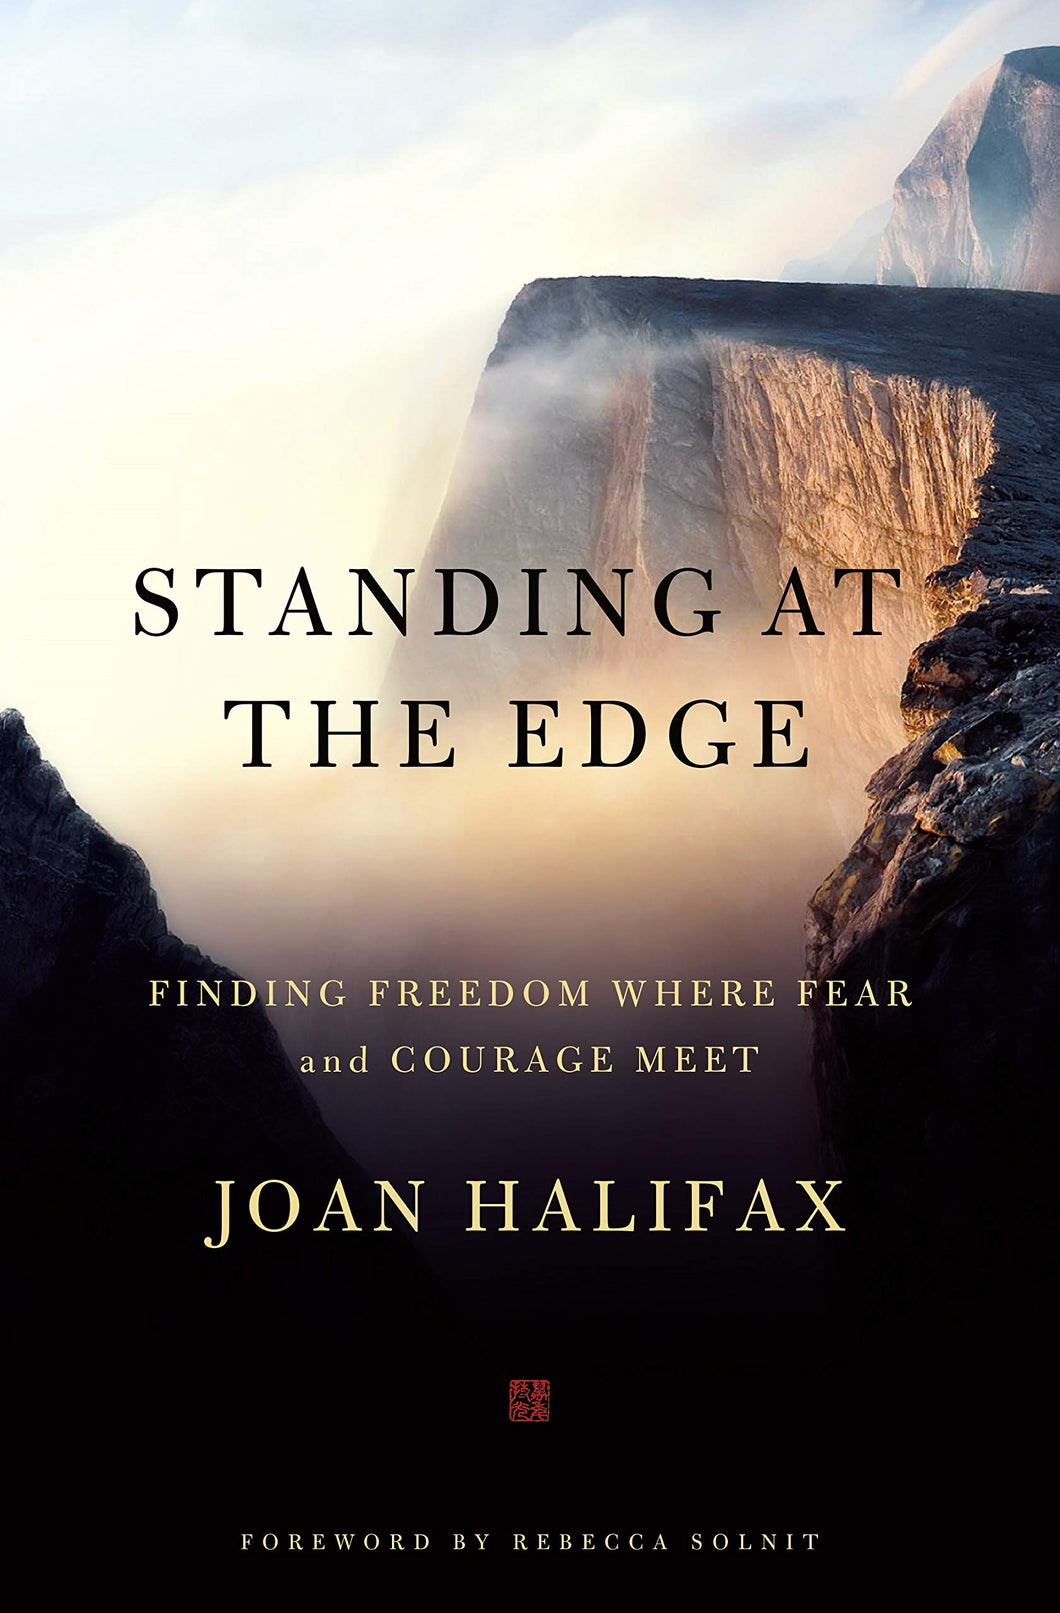 Standing at the Edge: Finding Freedom Where Fear & Courage Meet [Joan Halifax]